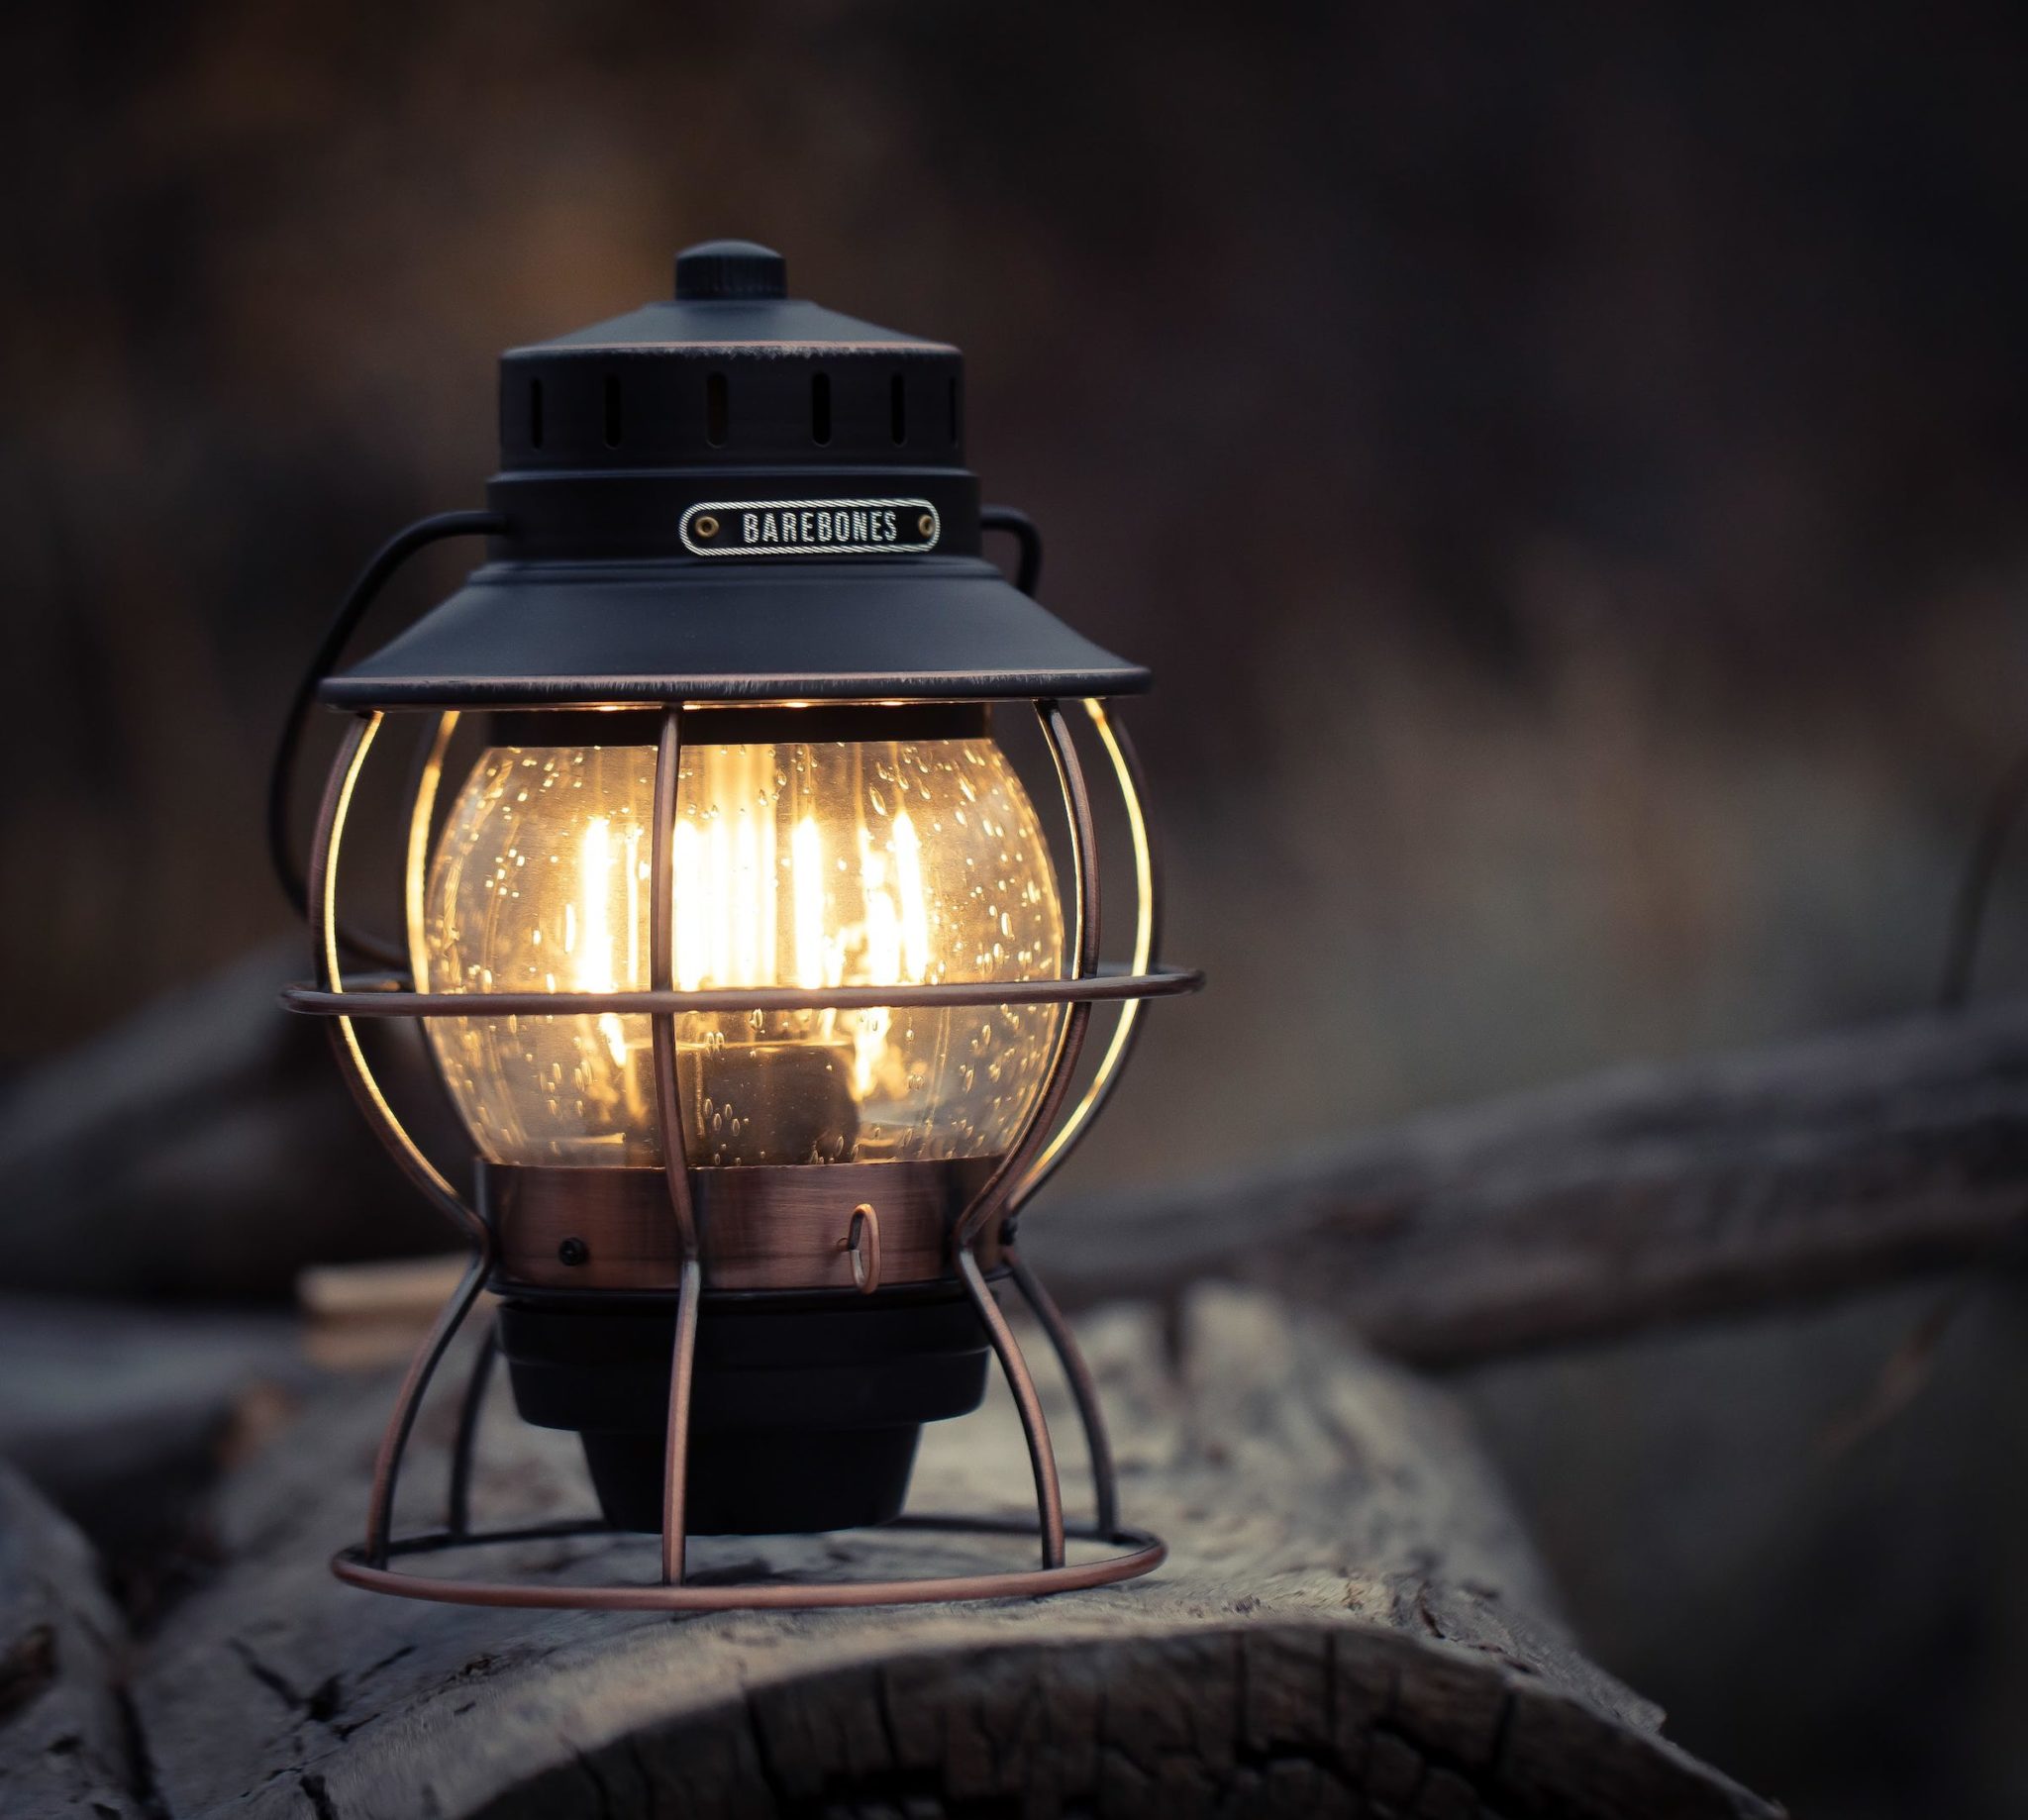 The Barebones Railroad Lantern - 100+ Hours Of Camp Light On One Charge